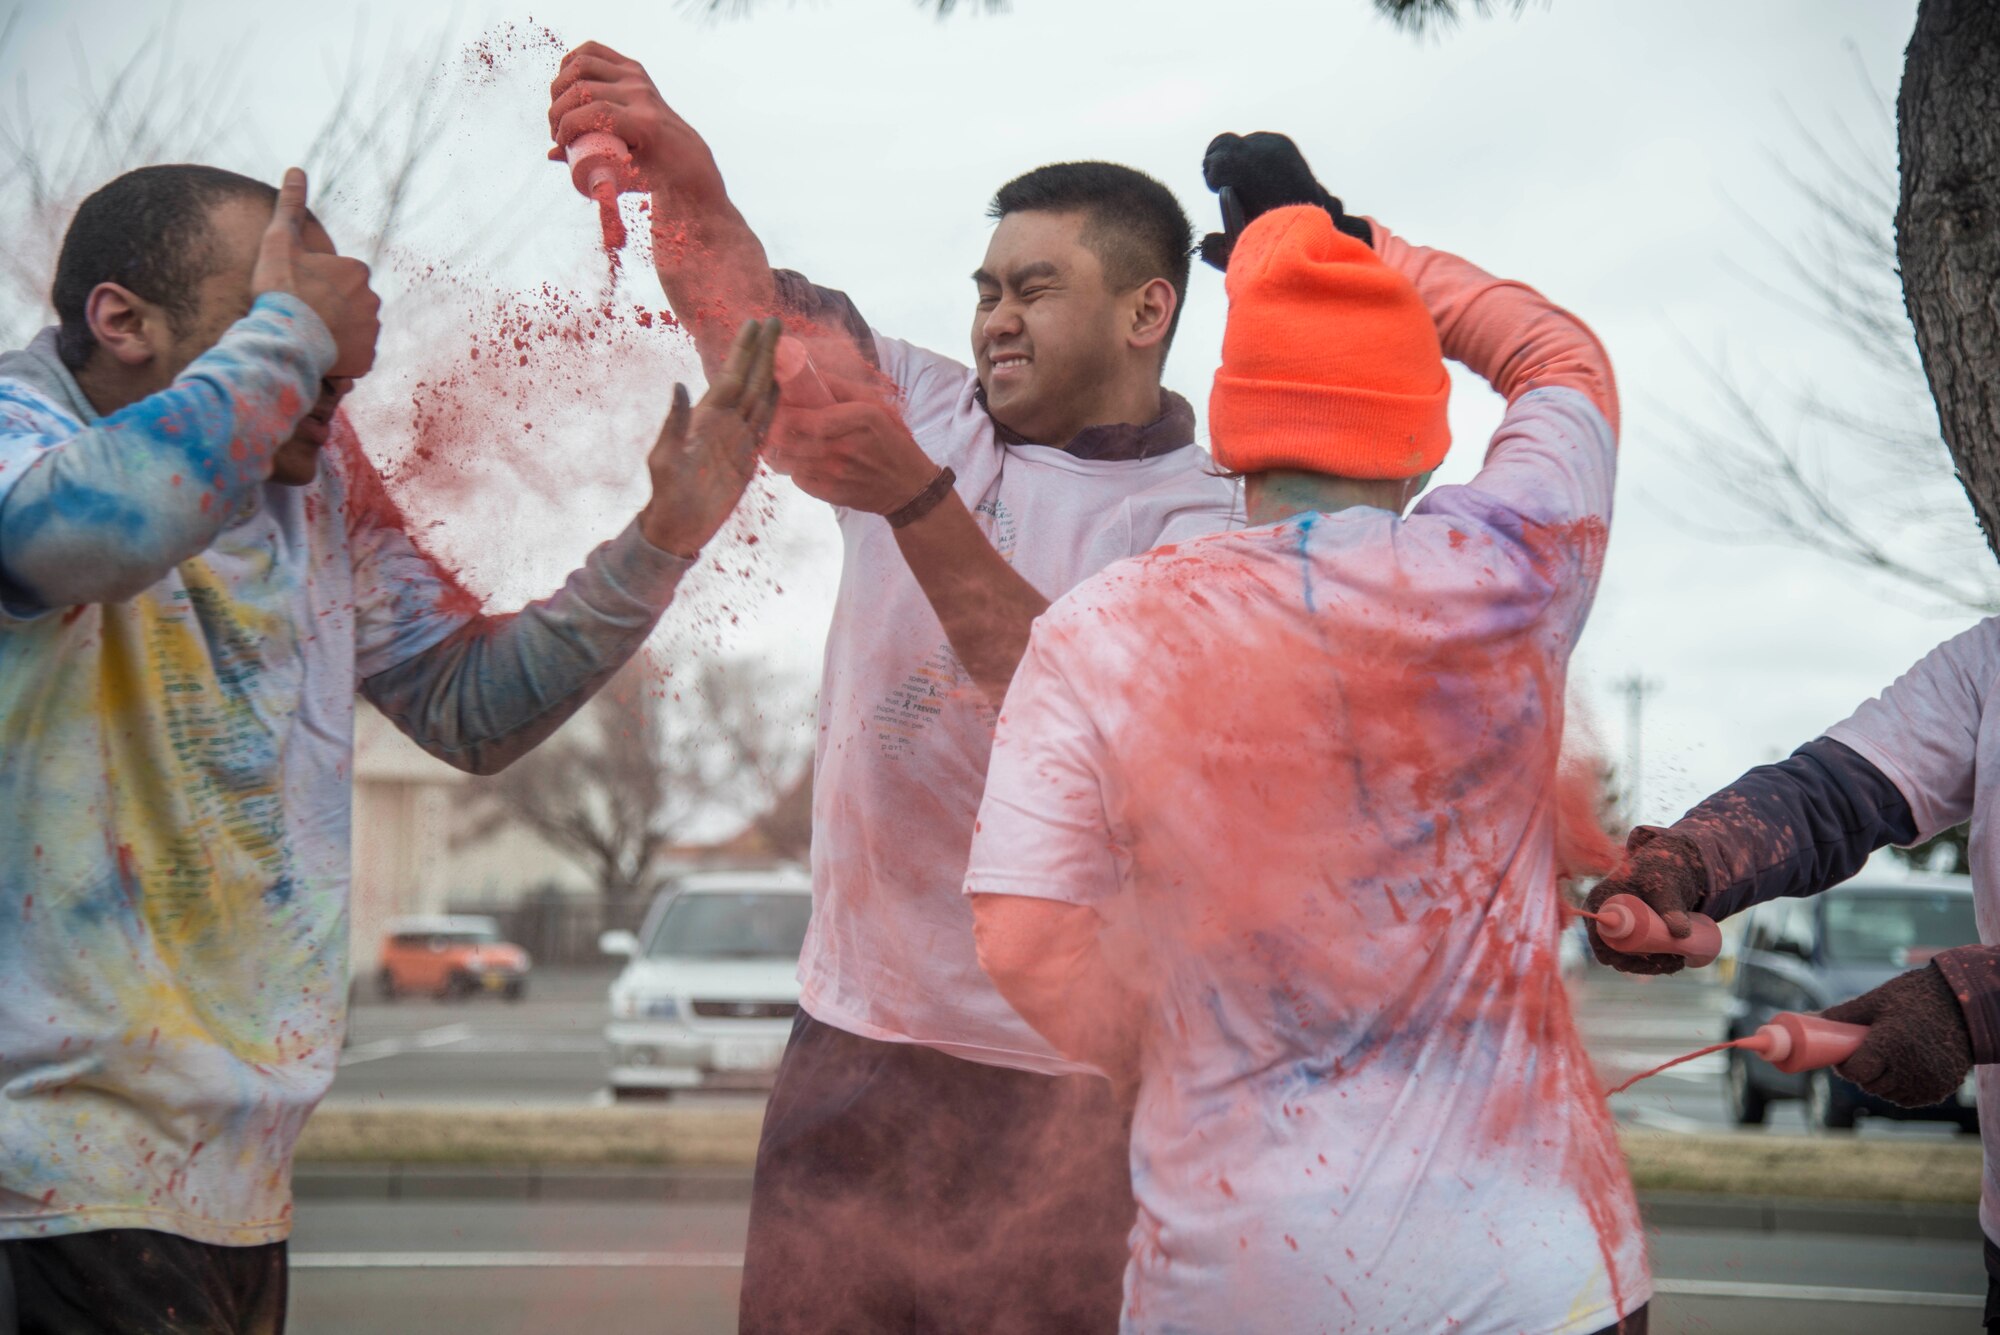 U.S. Air Force Airman 1st Class Francisco Valdepenas throws color on runners during Wingman Day at Misawa Air Base, Japan, March 31, 2017. Wingman Day included multiple events throughout the day, including a 3k color run. (U.S. Air Force Senior Airman Brittany A. Chase)